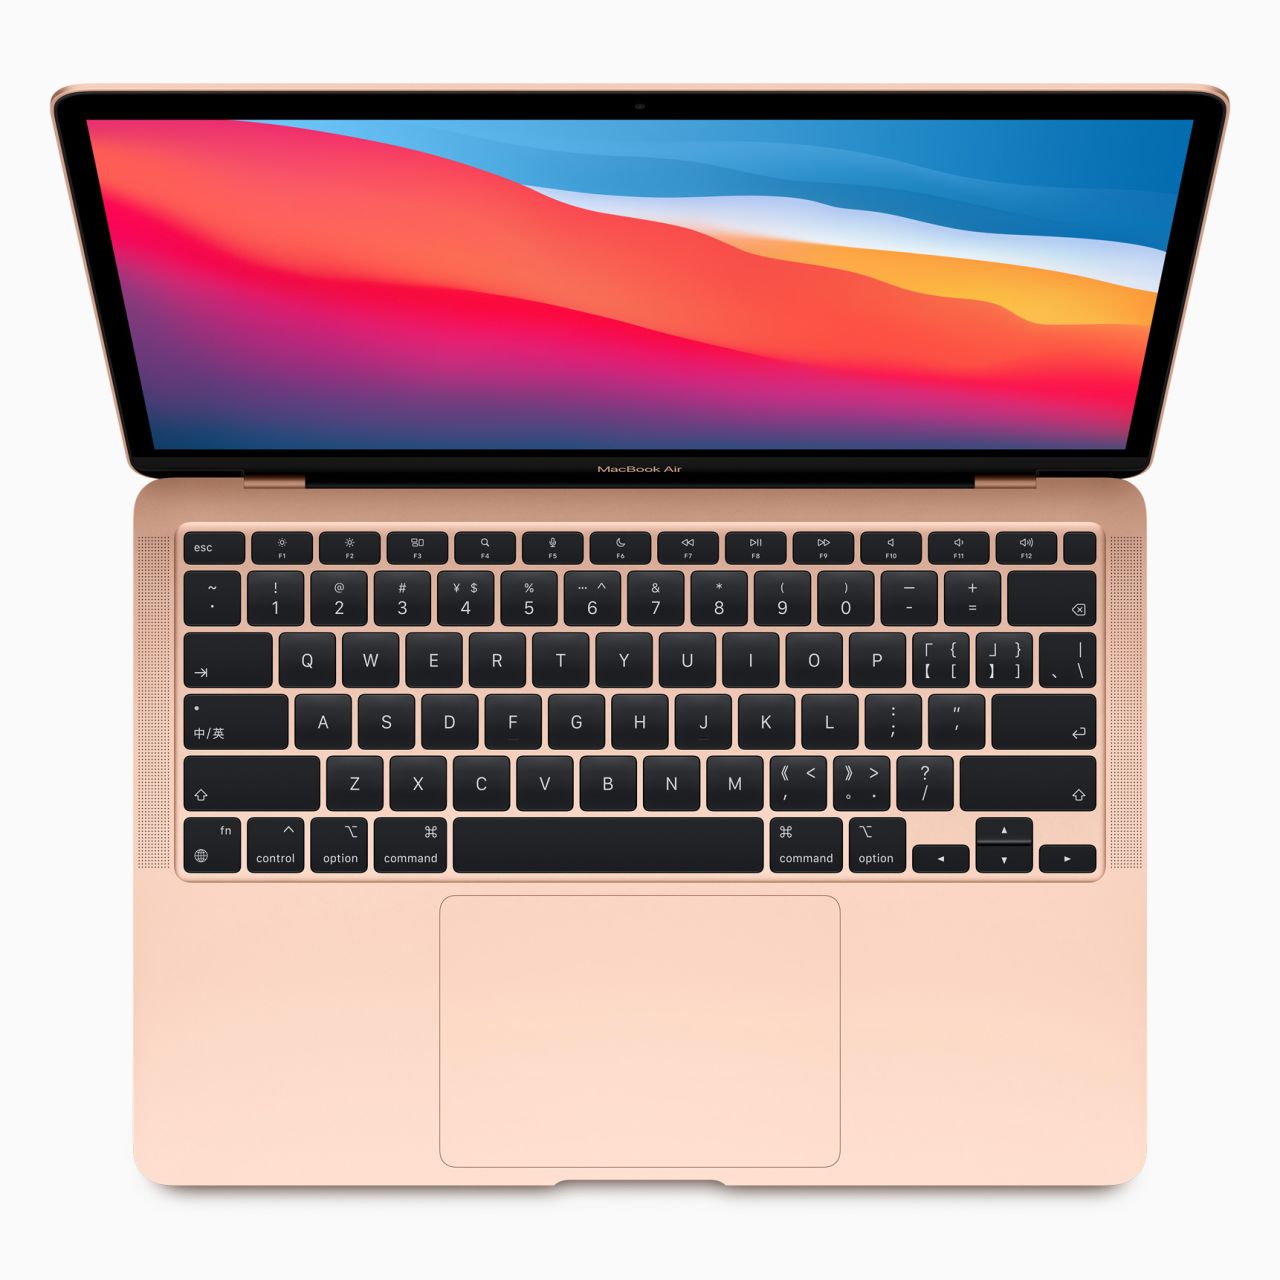 2019 vs 2020 MacBook Air - Every Difference Tested! 